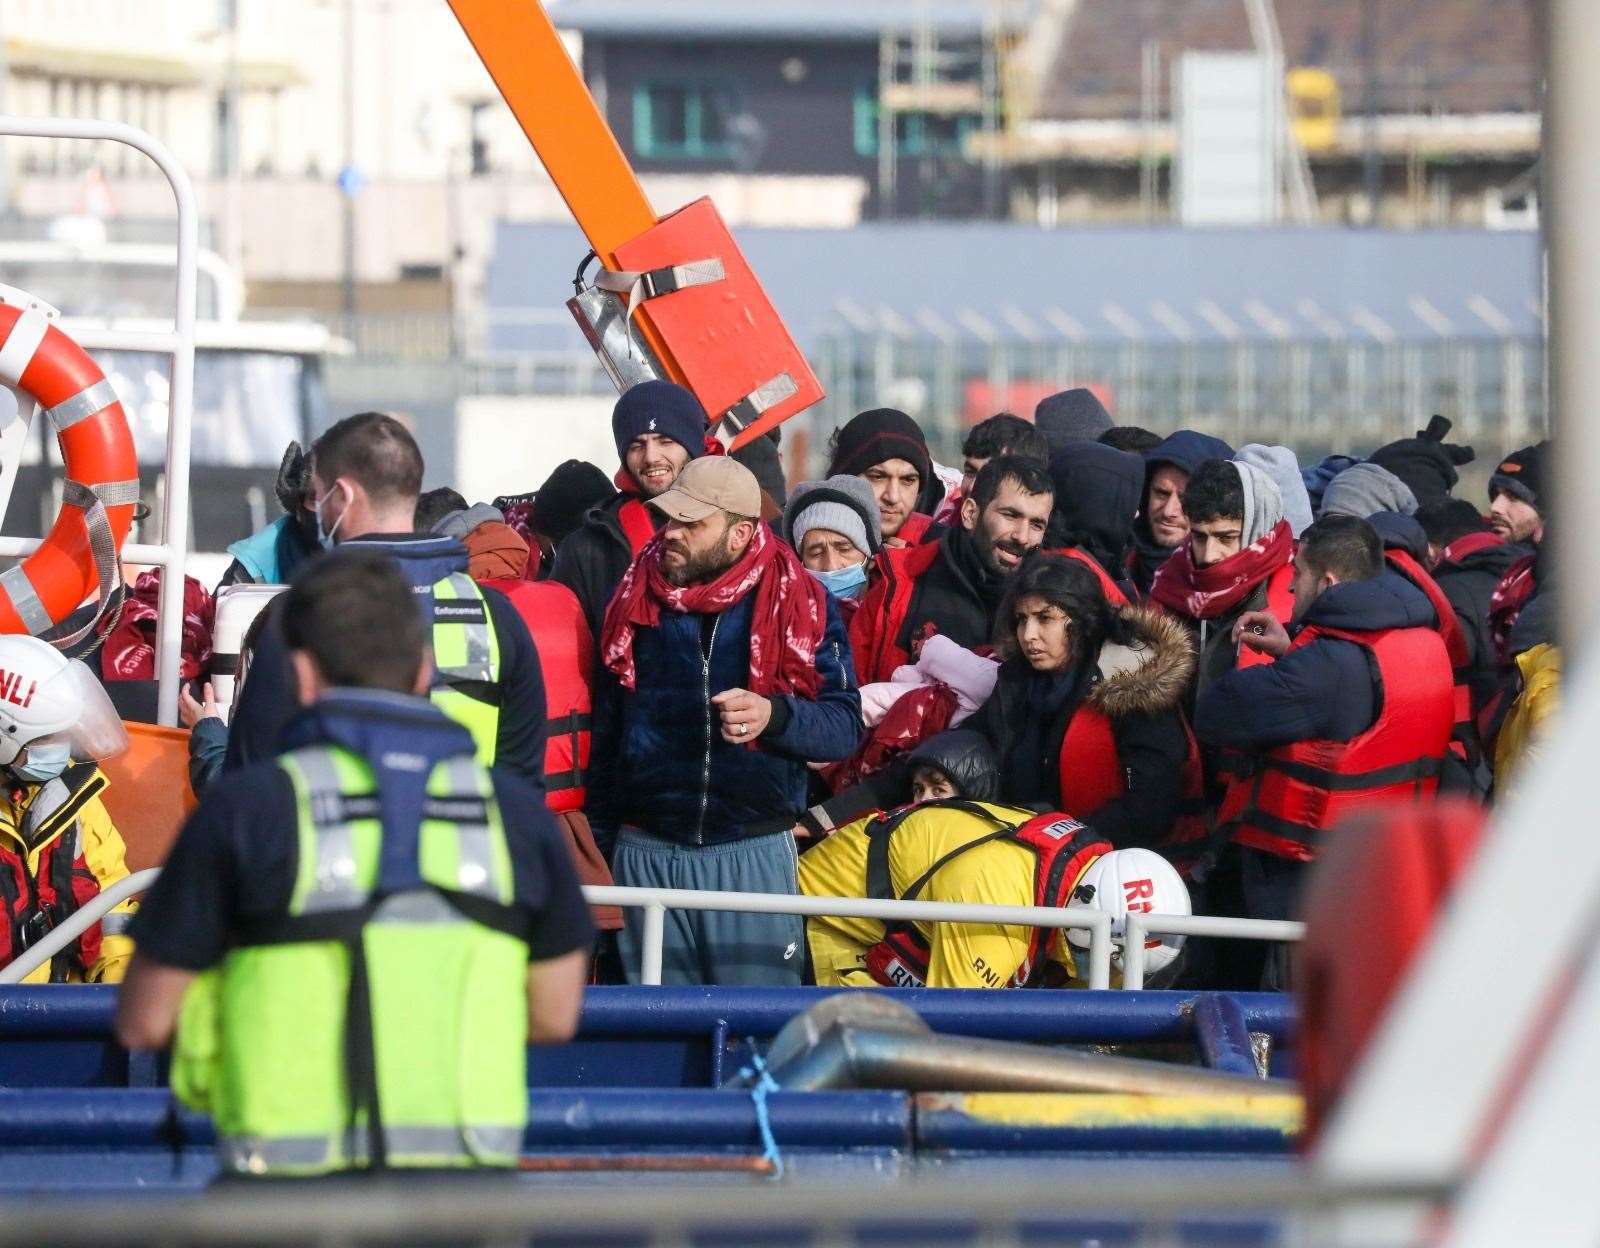 A group of asylum seekers at the Tug Haven facility in Dover yesterday. Picture: UKNIP